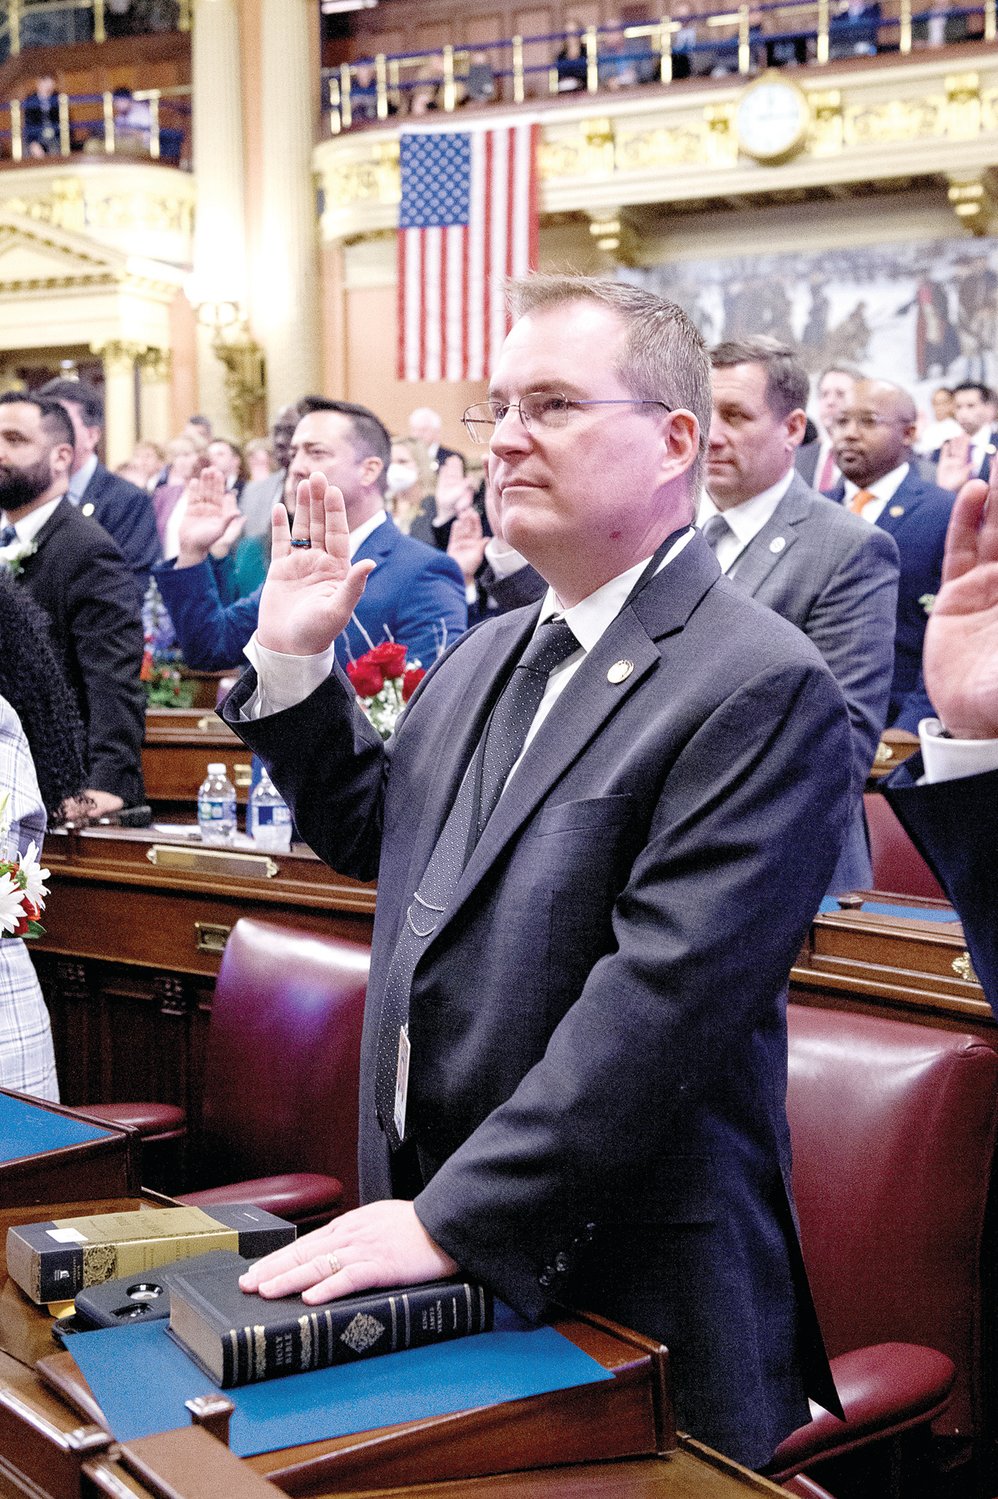 Rep. Brian Munroe, a Democrat, represents the 144th PA House District, which includes Warminster, Warrington and part of New Britain Township, as well as the borough of Ivyland. Reach his legislative office at 717-772-1983.